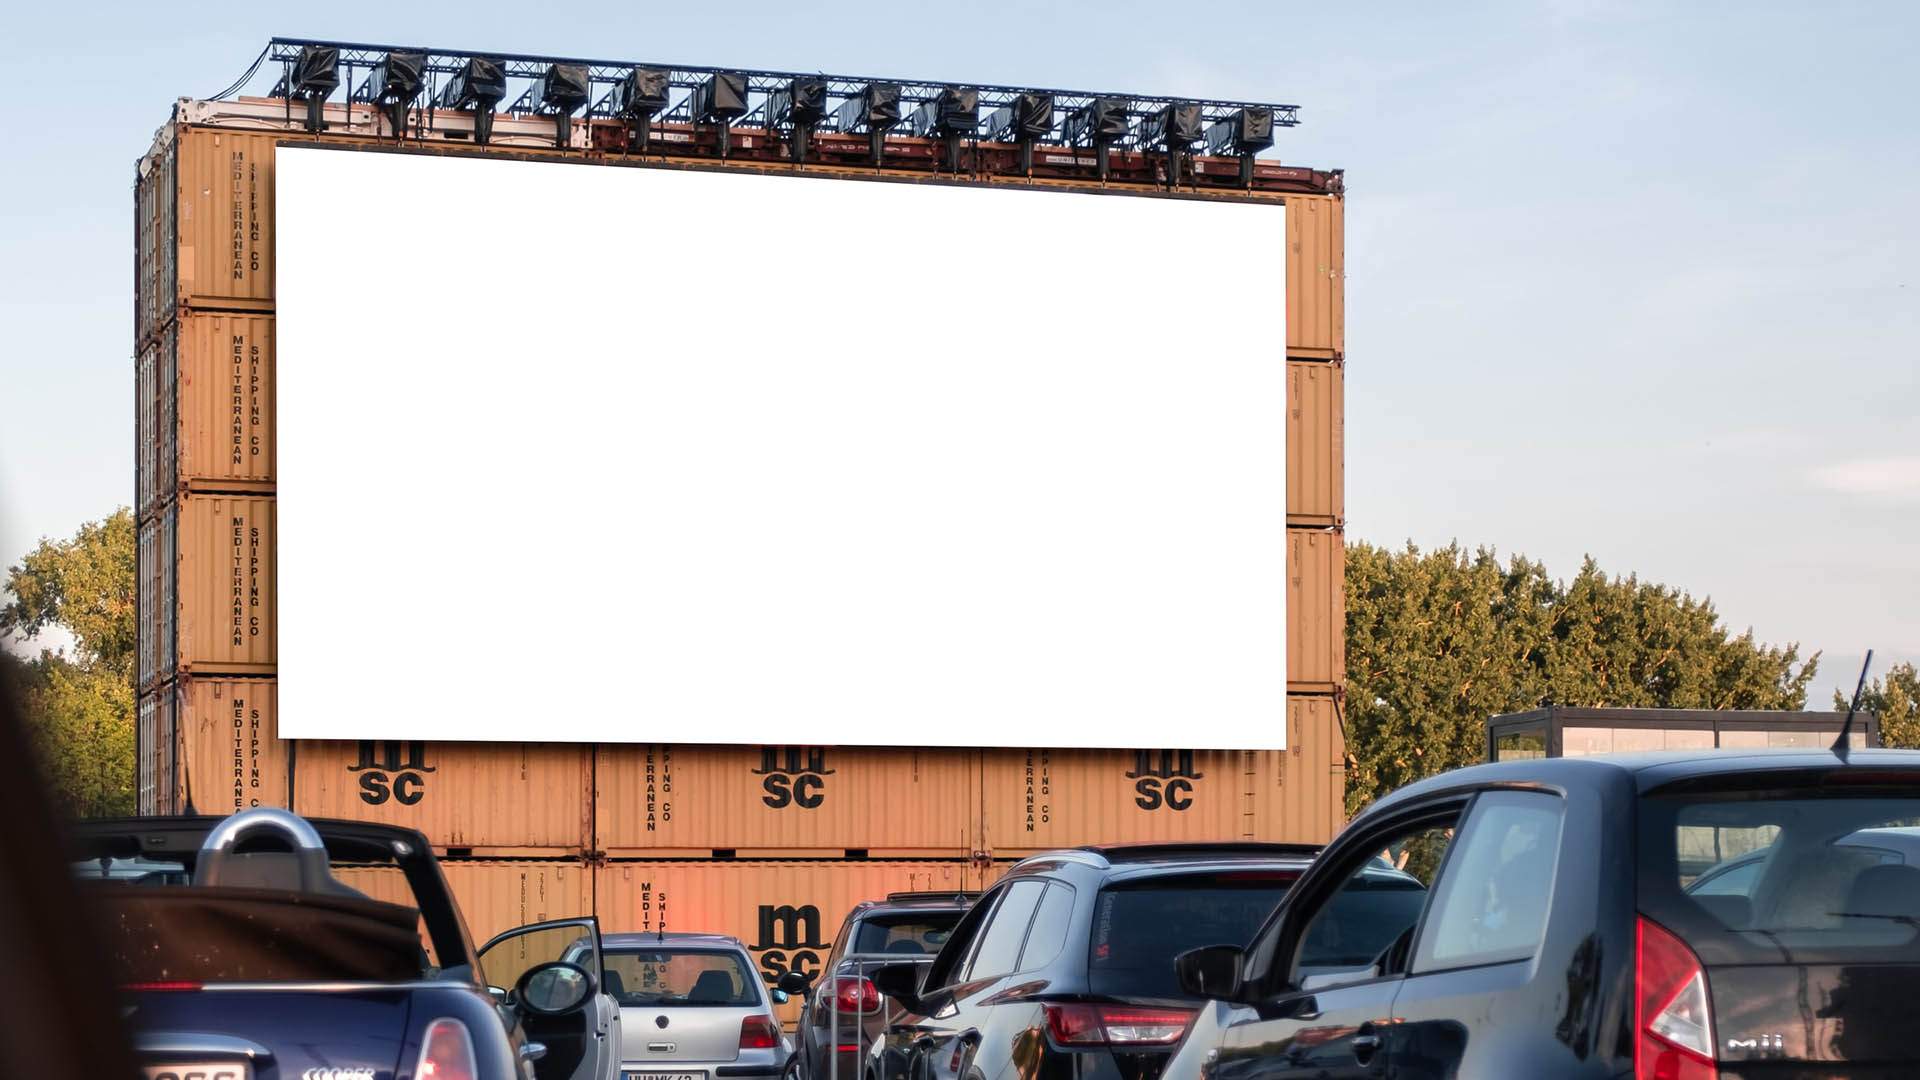 A Pop-Up Drive-In Cinema Screening Disney, Marvel and Pixar Films Is Touring the East Coast